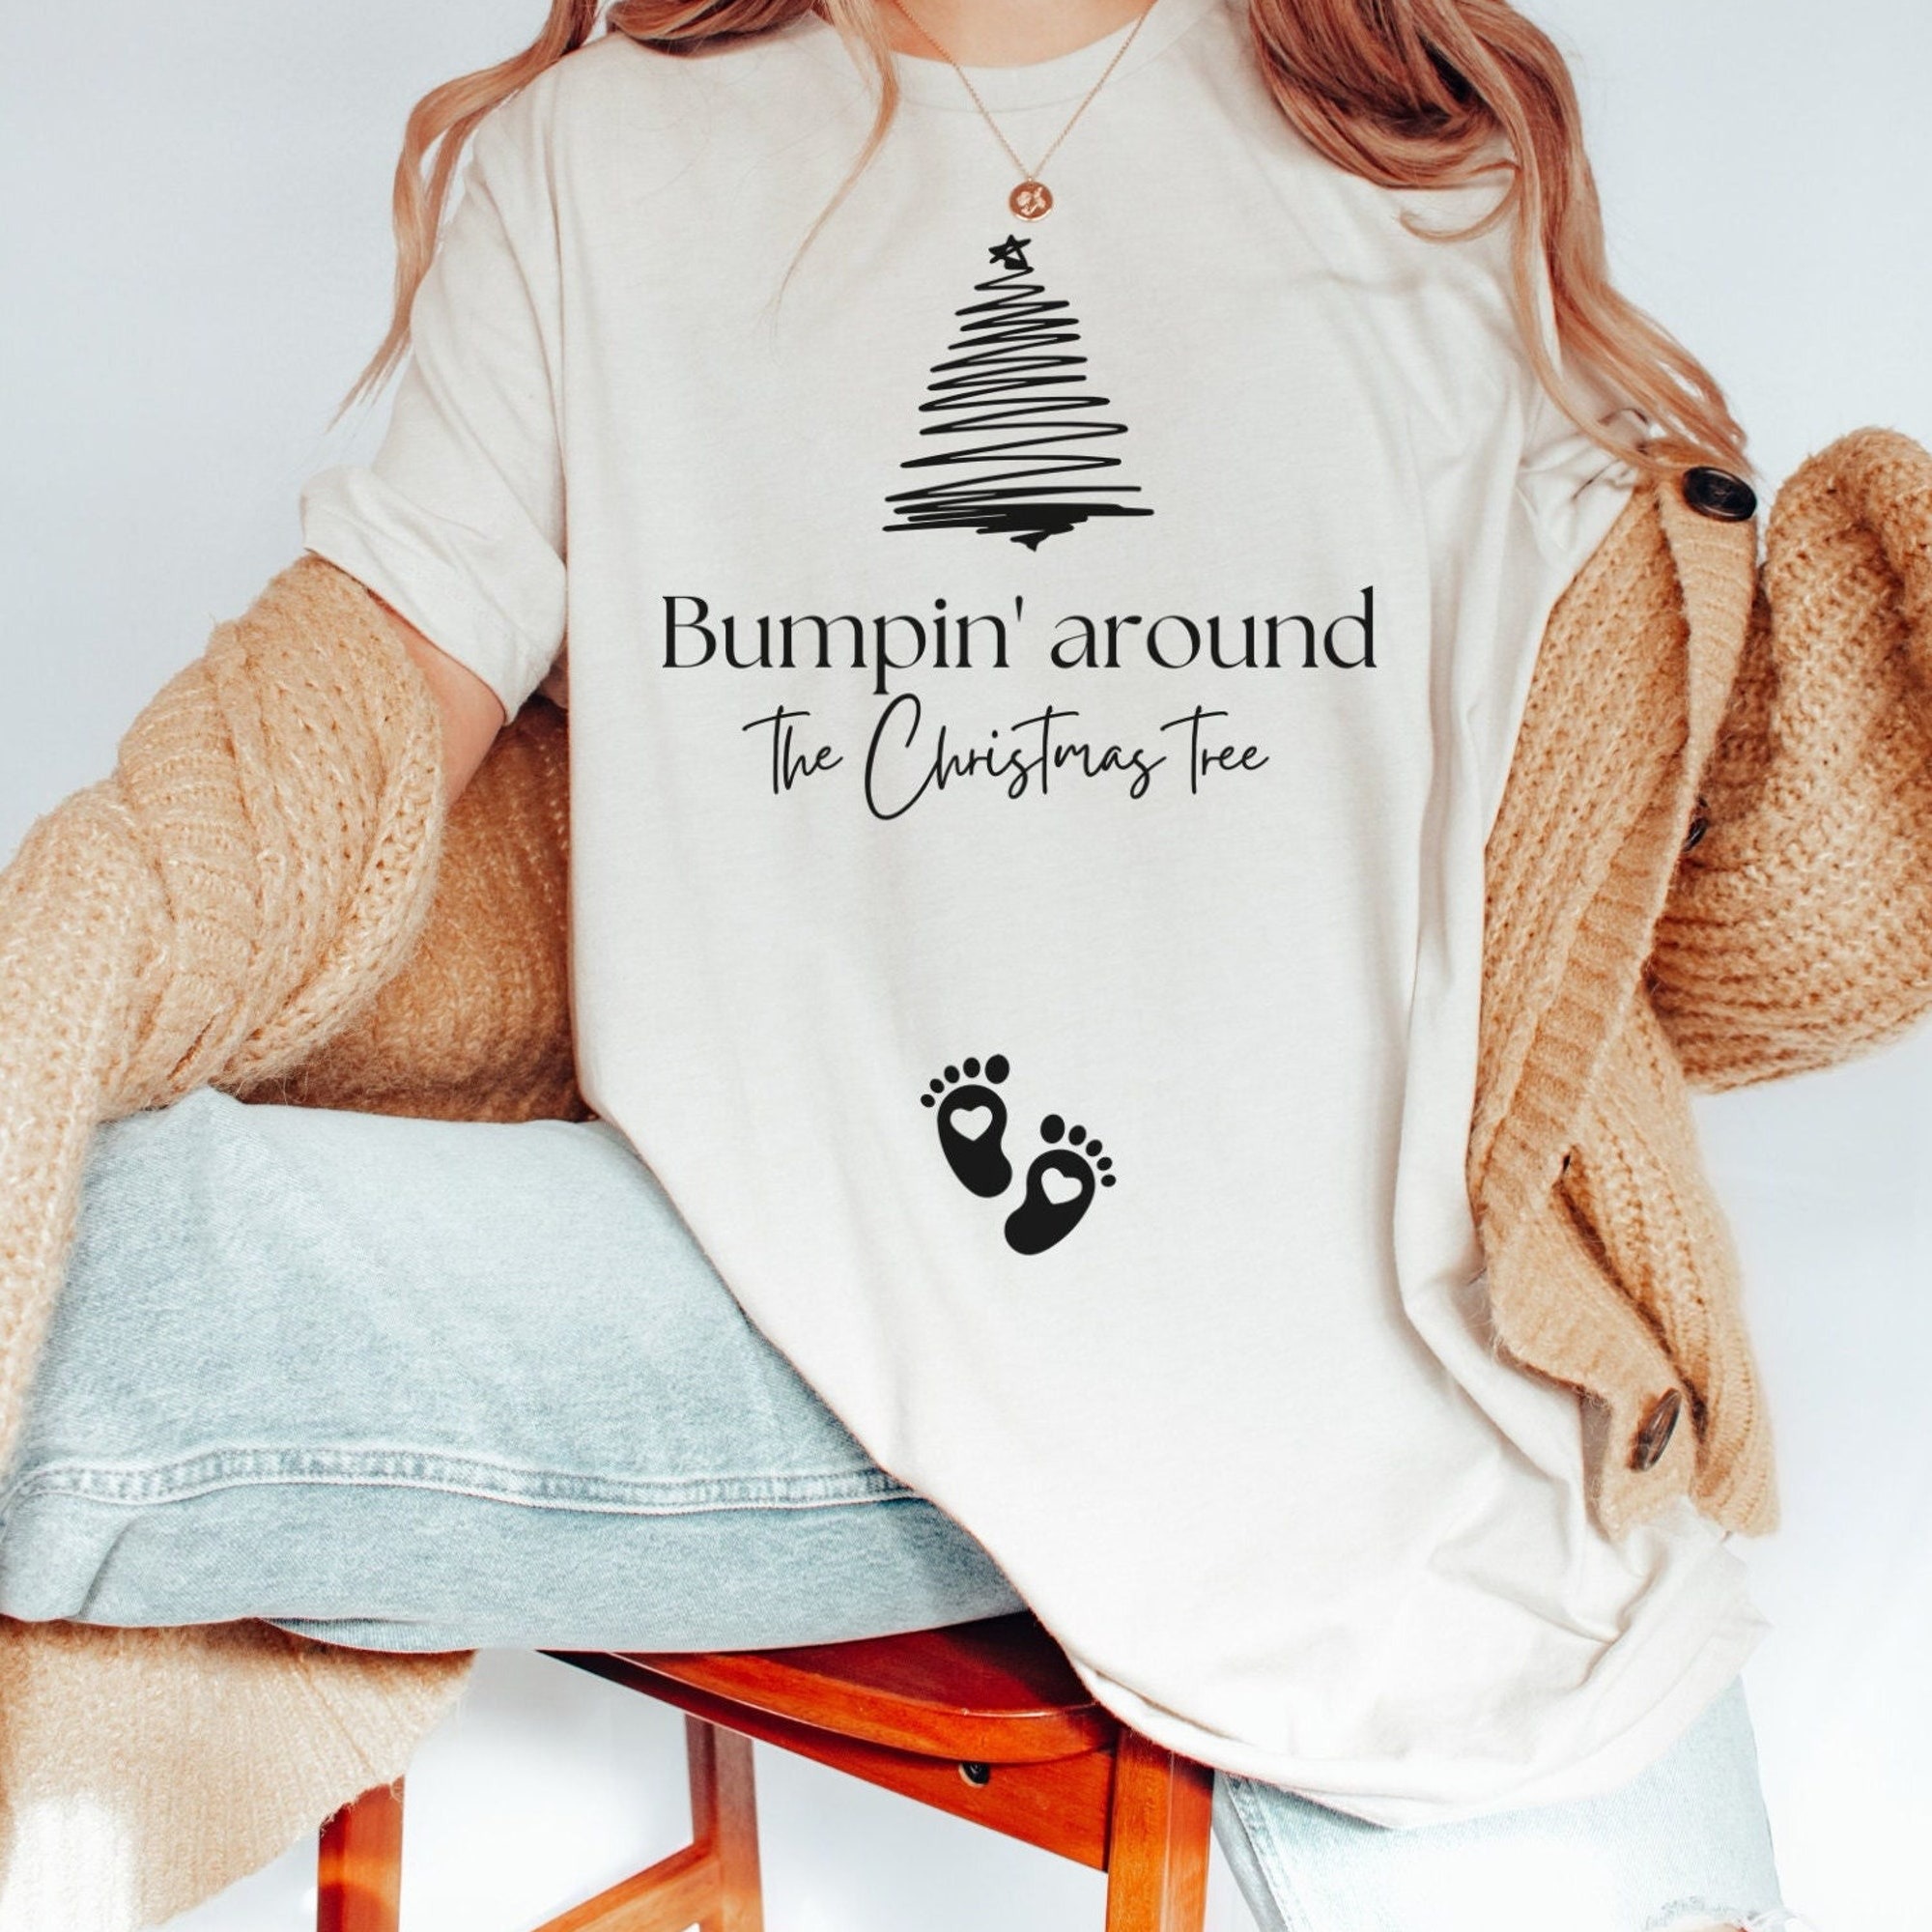 Christmas Pregnancy Announcement shirt, Bumpin around the Christmas tree maternity t-shirt, Funny Baby reveal tshirt to family